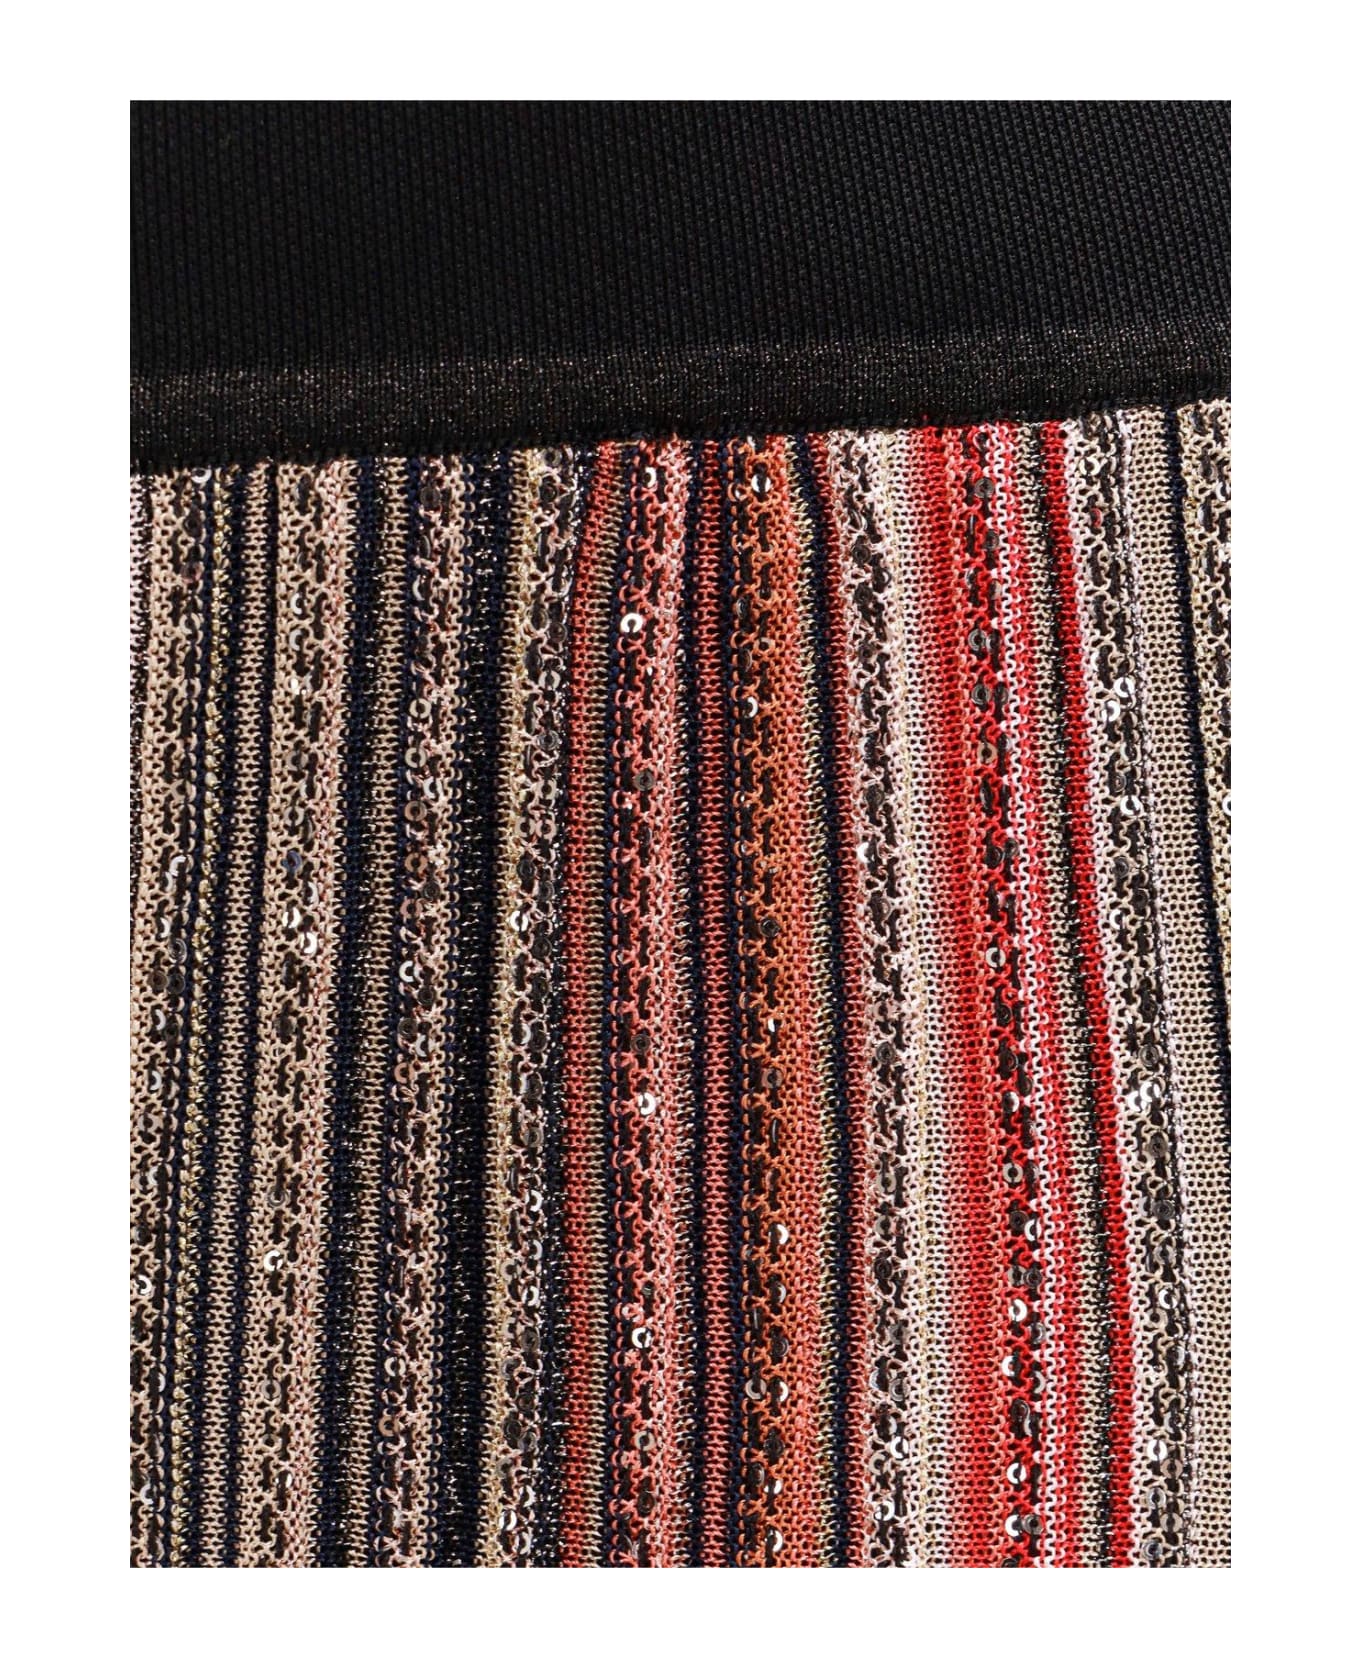 Missoni Sequins Striped Knit Trousers - Af Multi